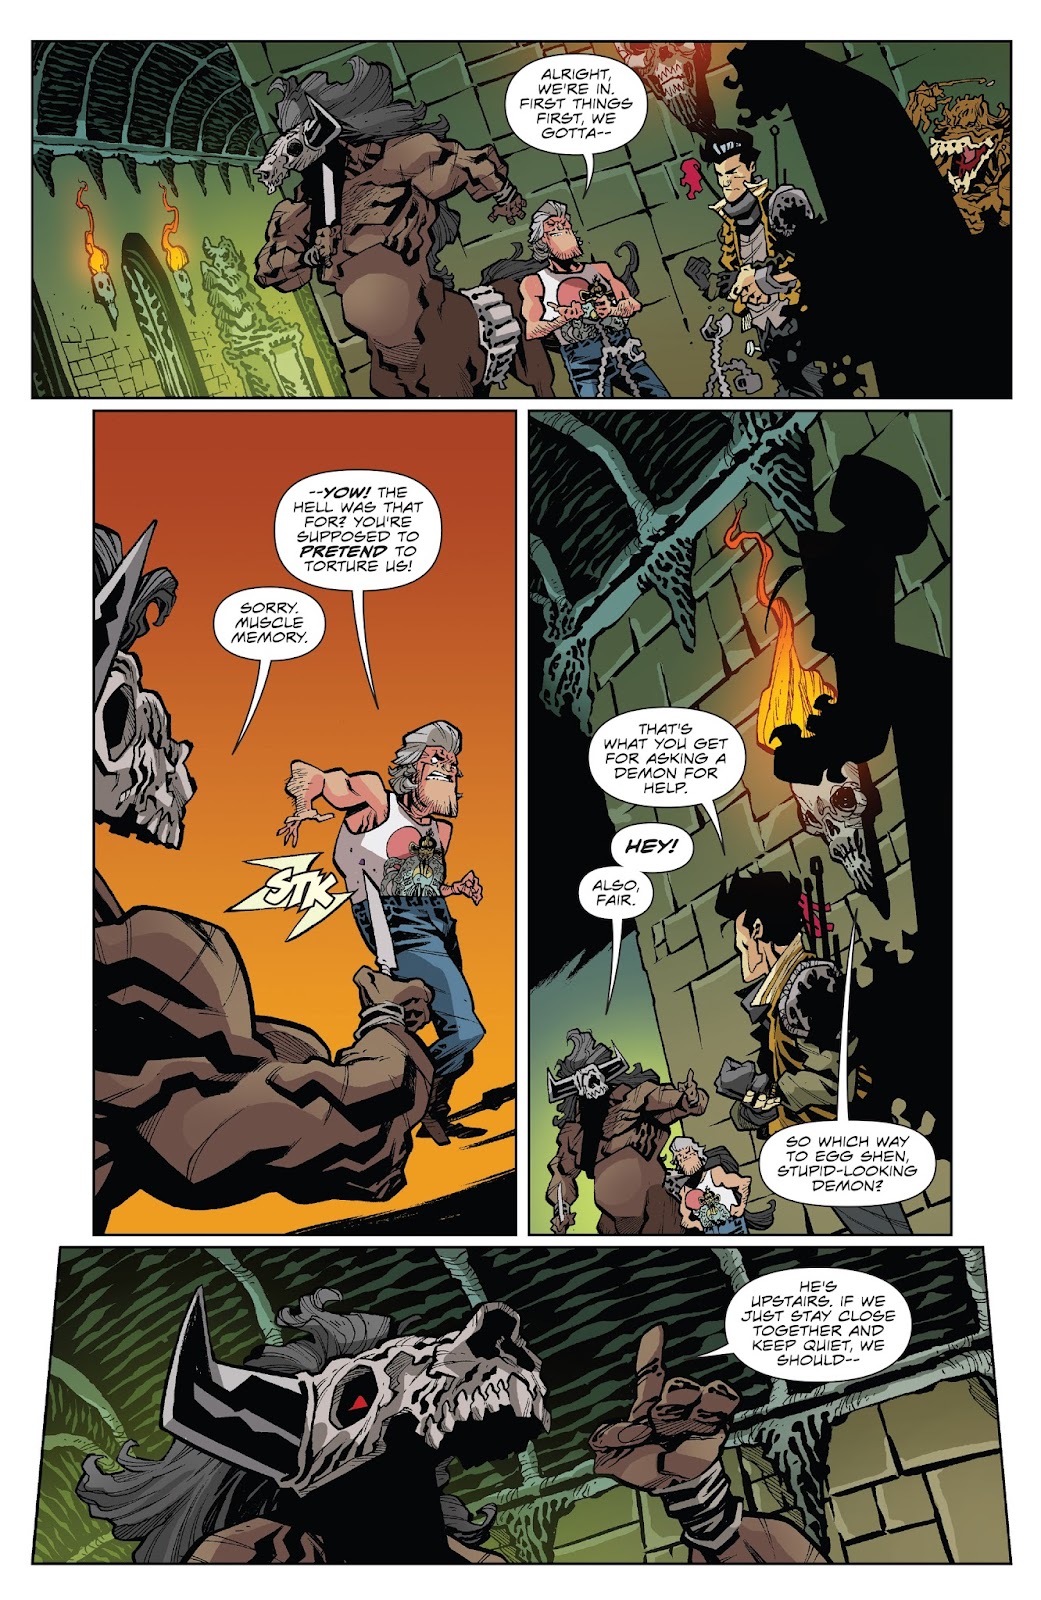 Big Trouble in Little China: Old Man Jack issue 7 - Page 4